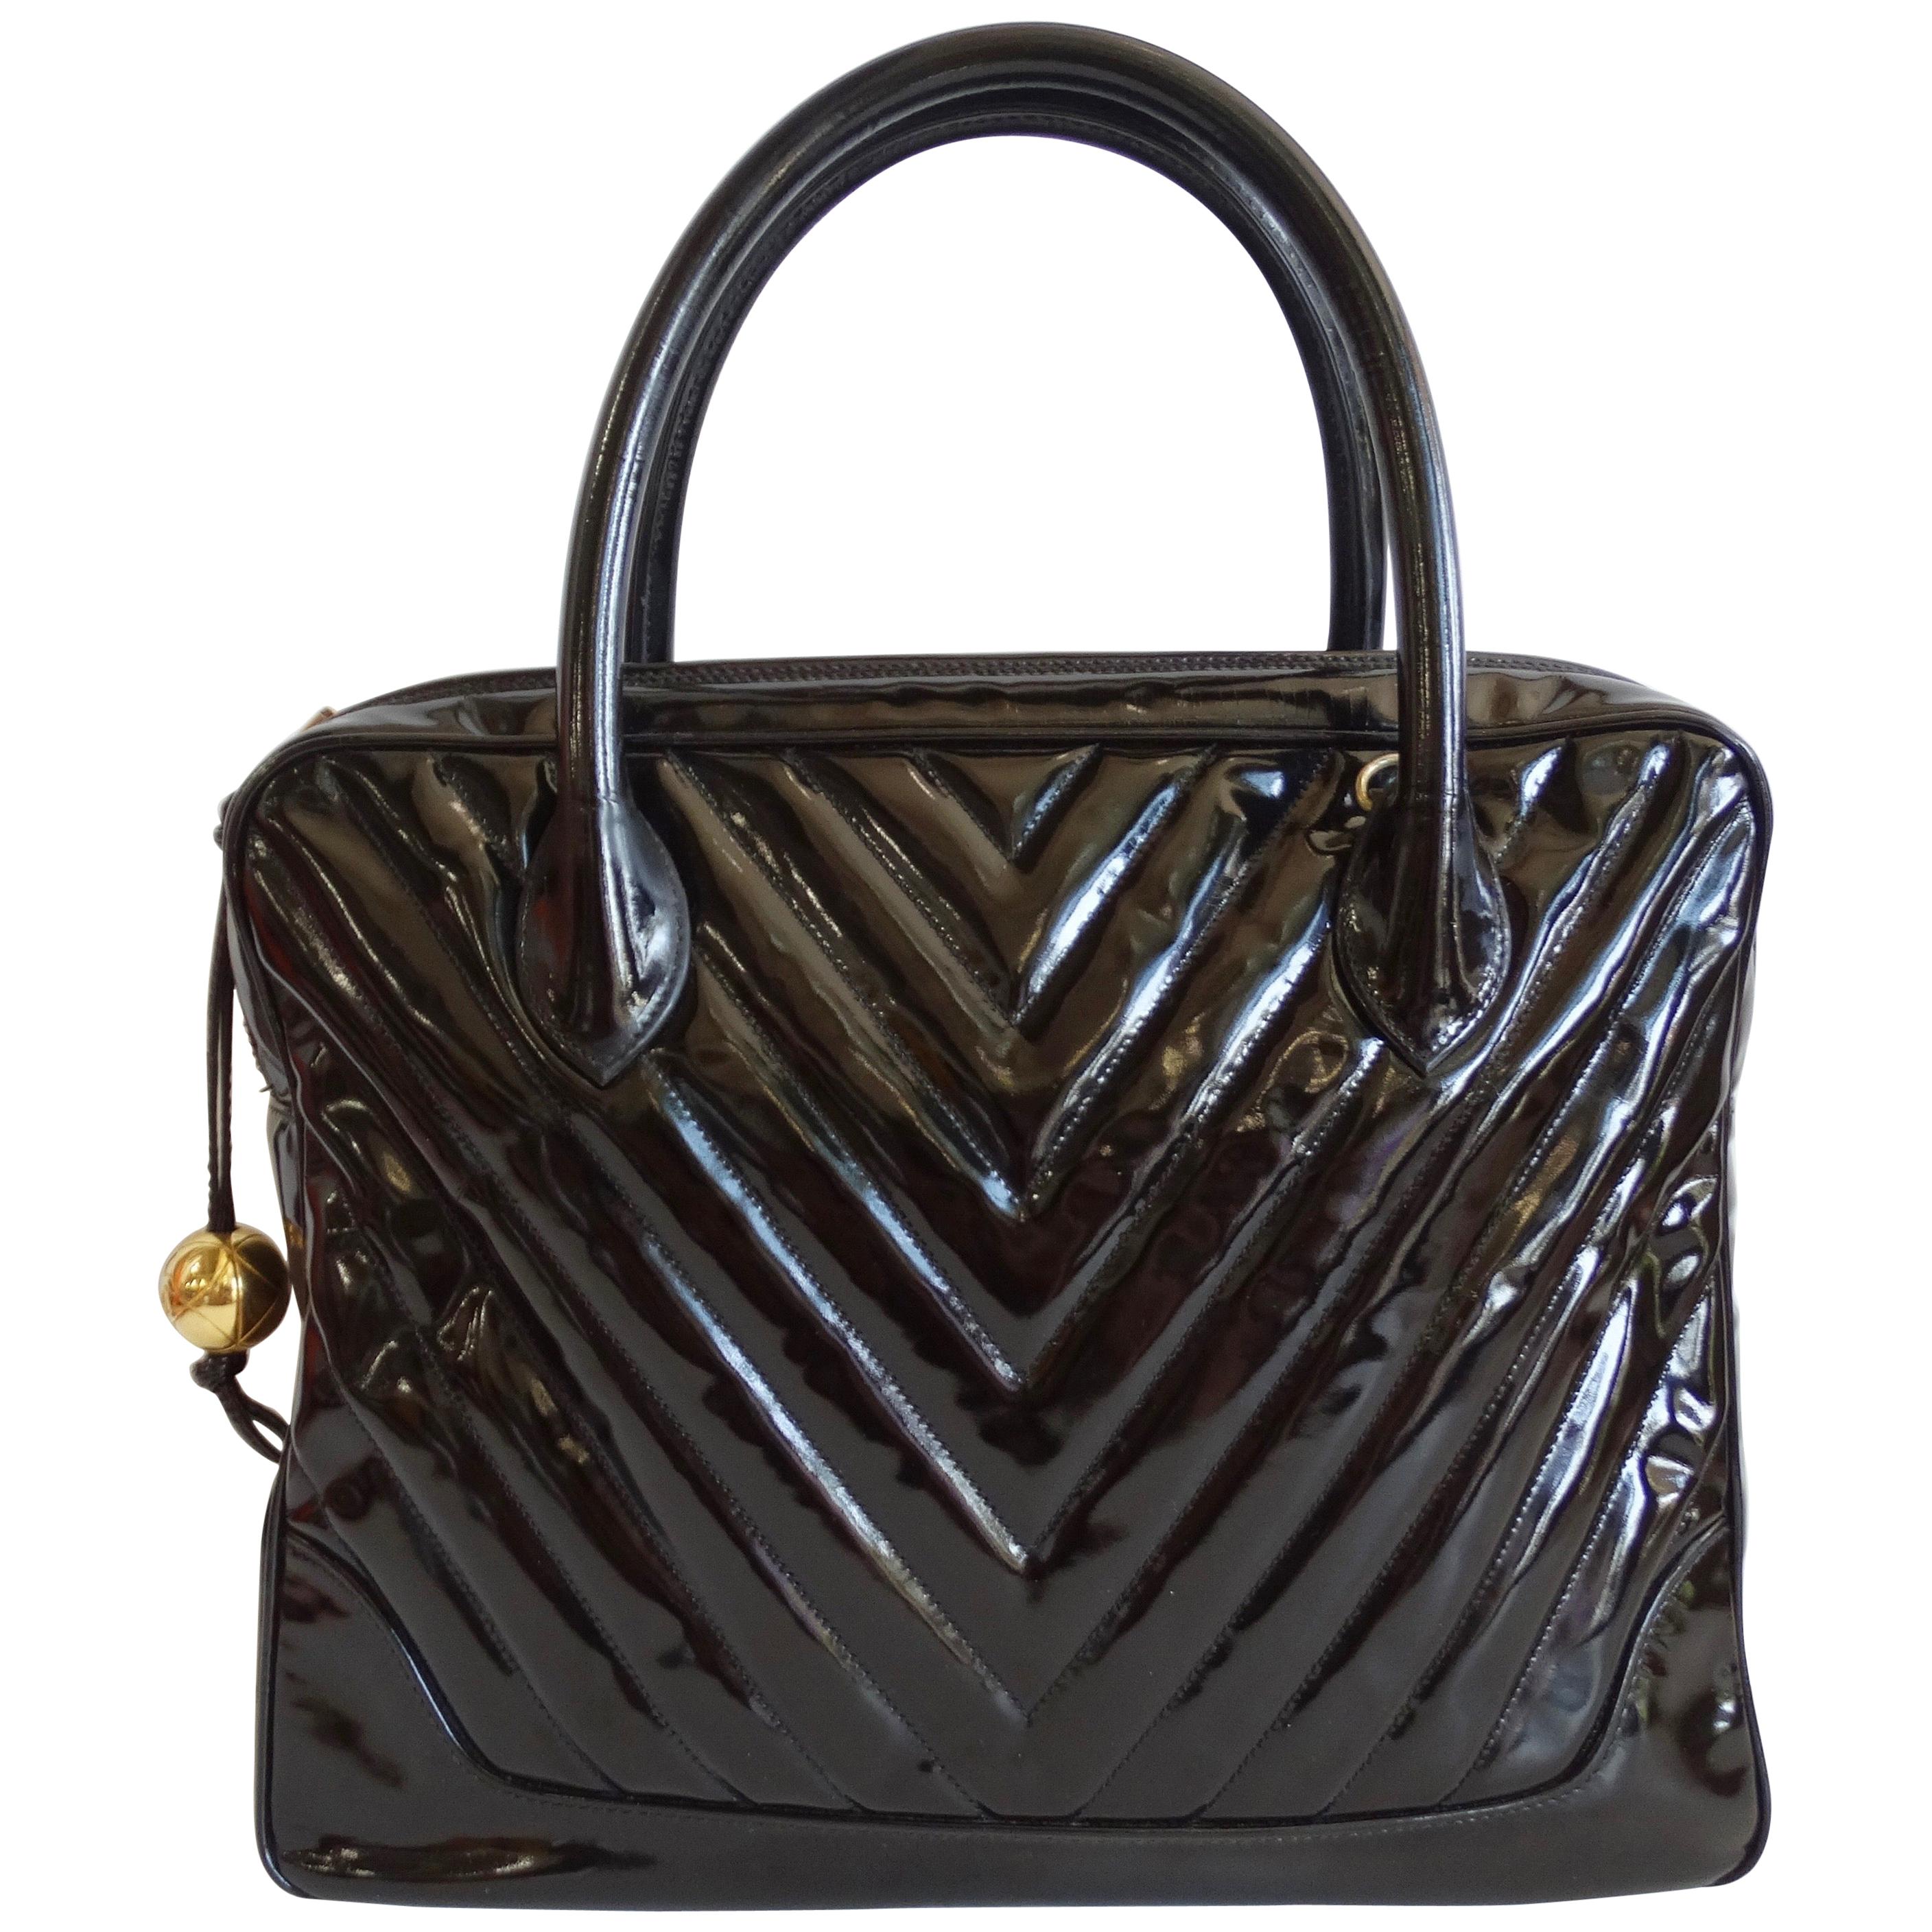 1980s Chanel Patent Leather Chevron Quilted Bag